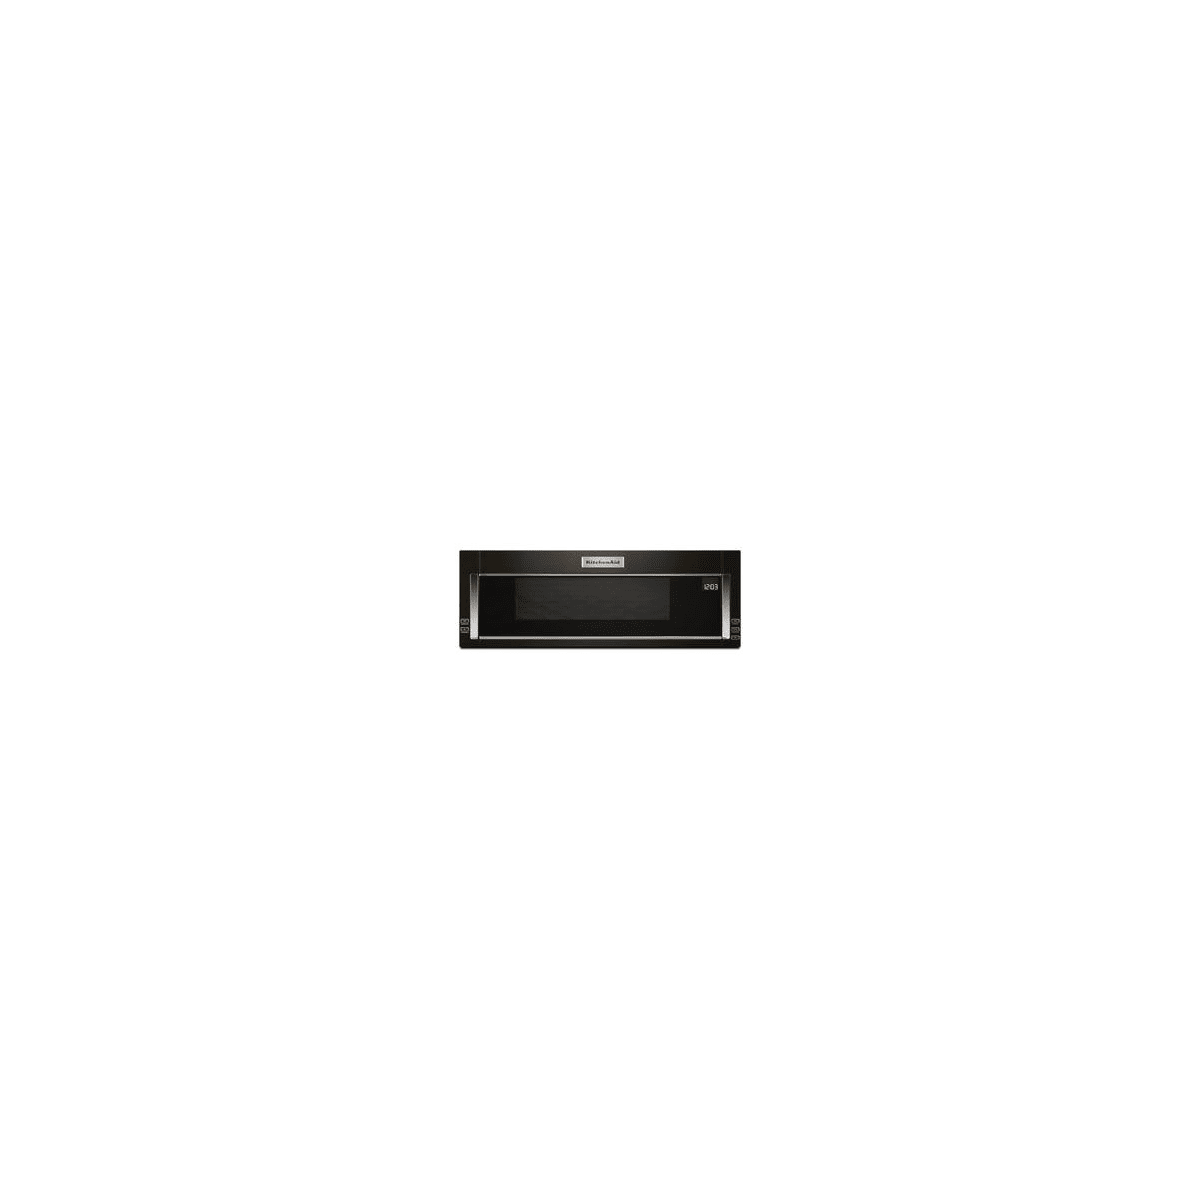 KitchenAid 30-inch, 1.1 cu.ft. Over-the-Range Microwave Oven with Whisper  Quiet® Ventilation System KMLS311HSS